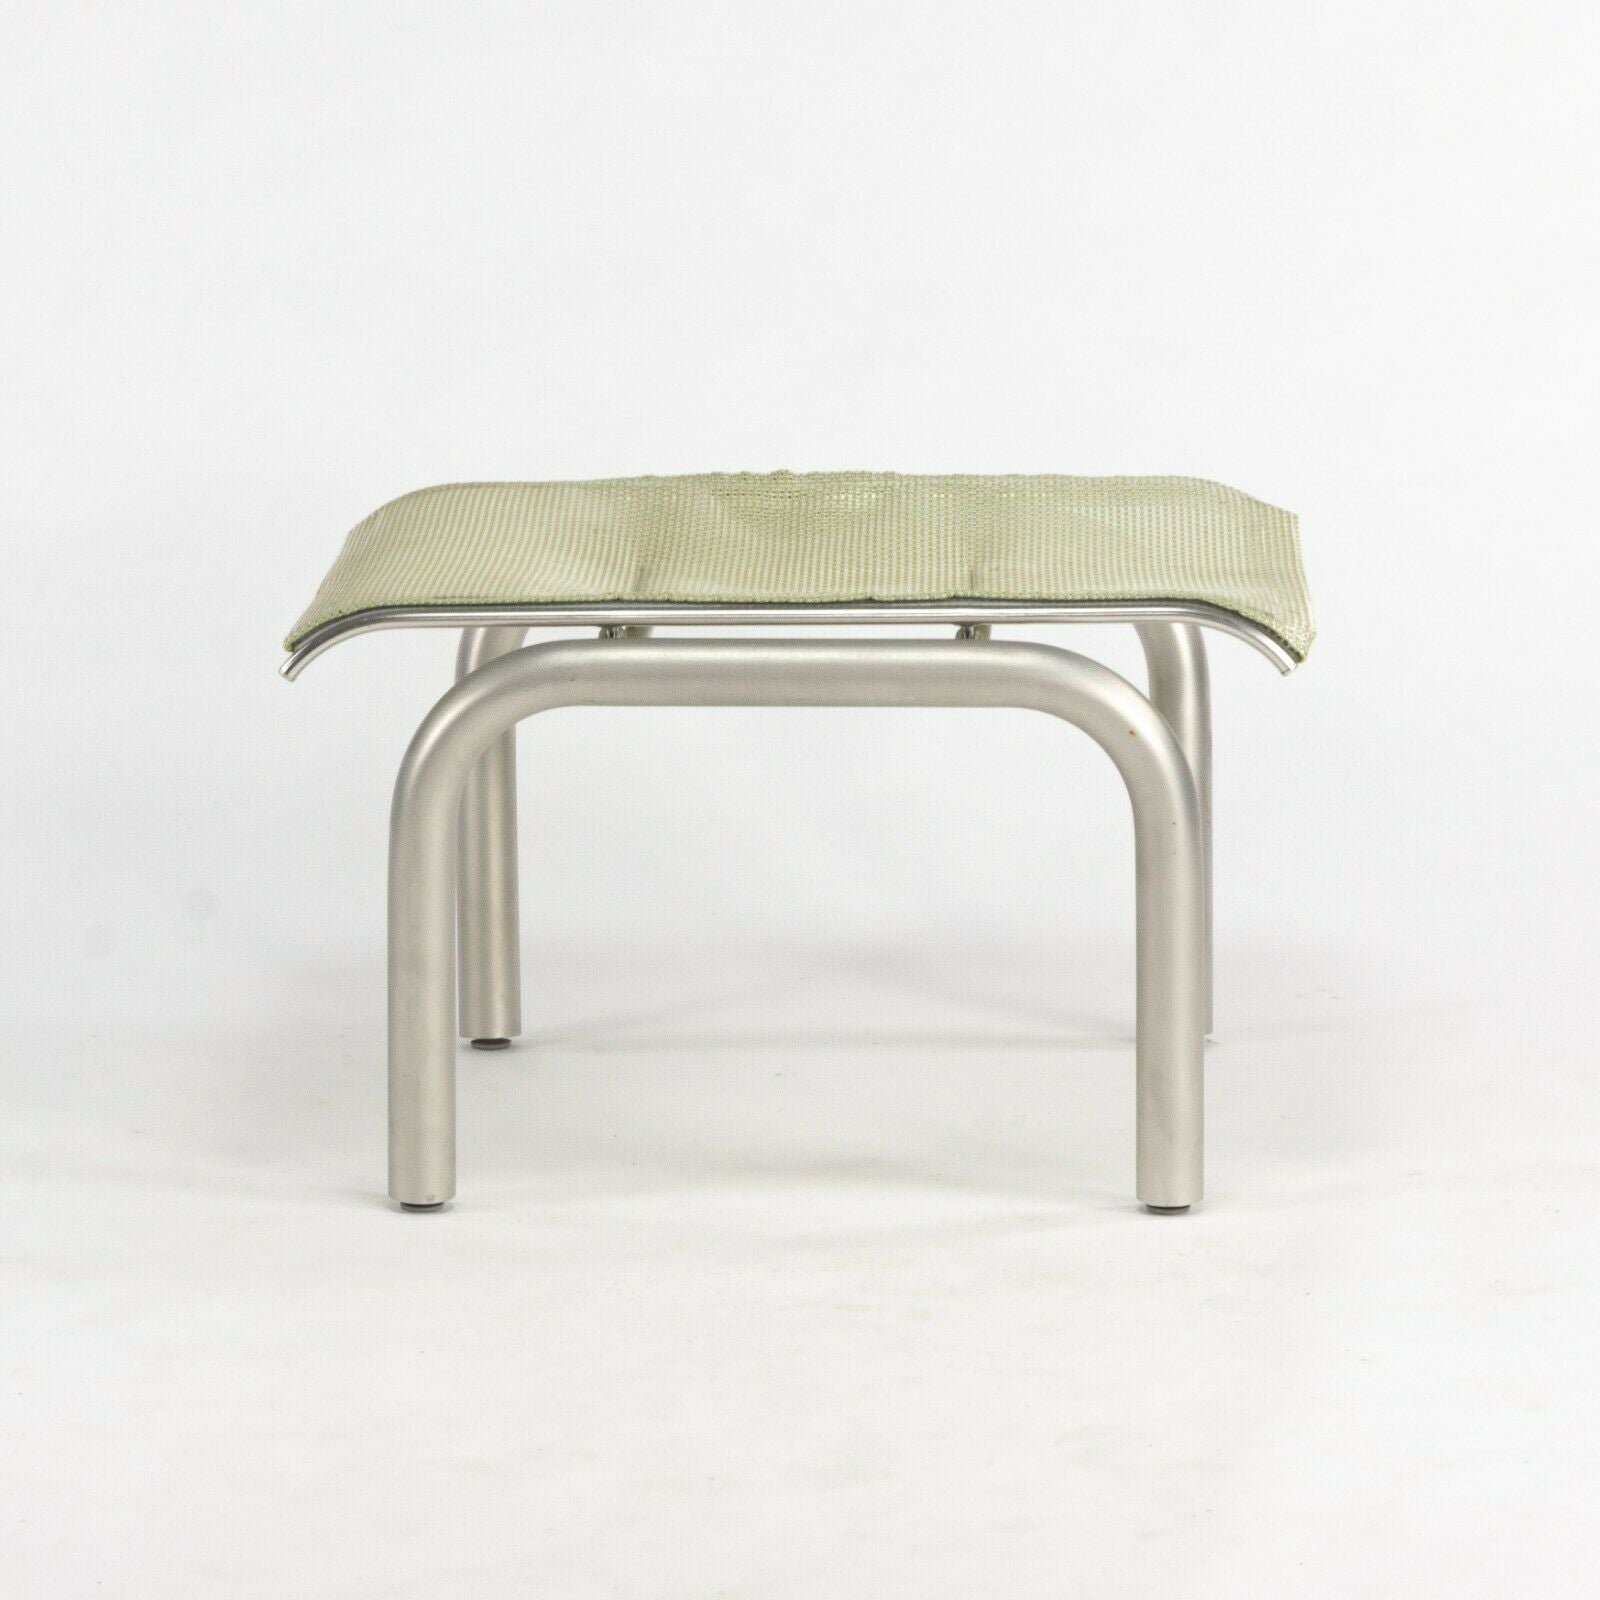 SOLD Prototype 2002 Collection Outdoor Stainless / Mesh Ottoman by Richard Shultz